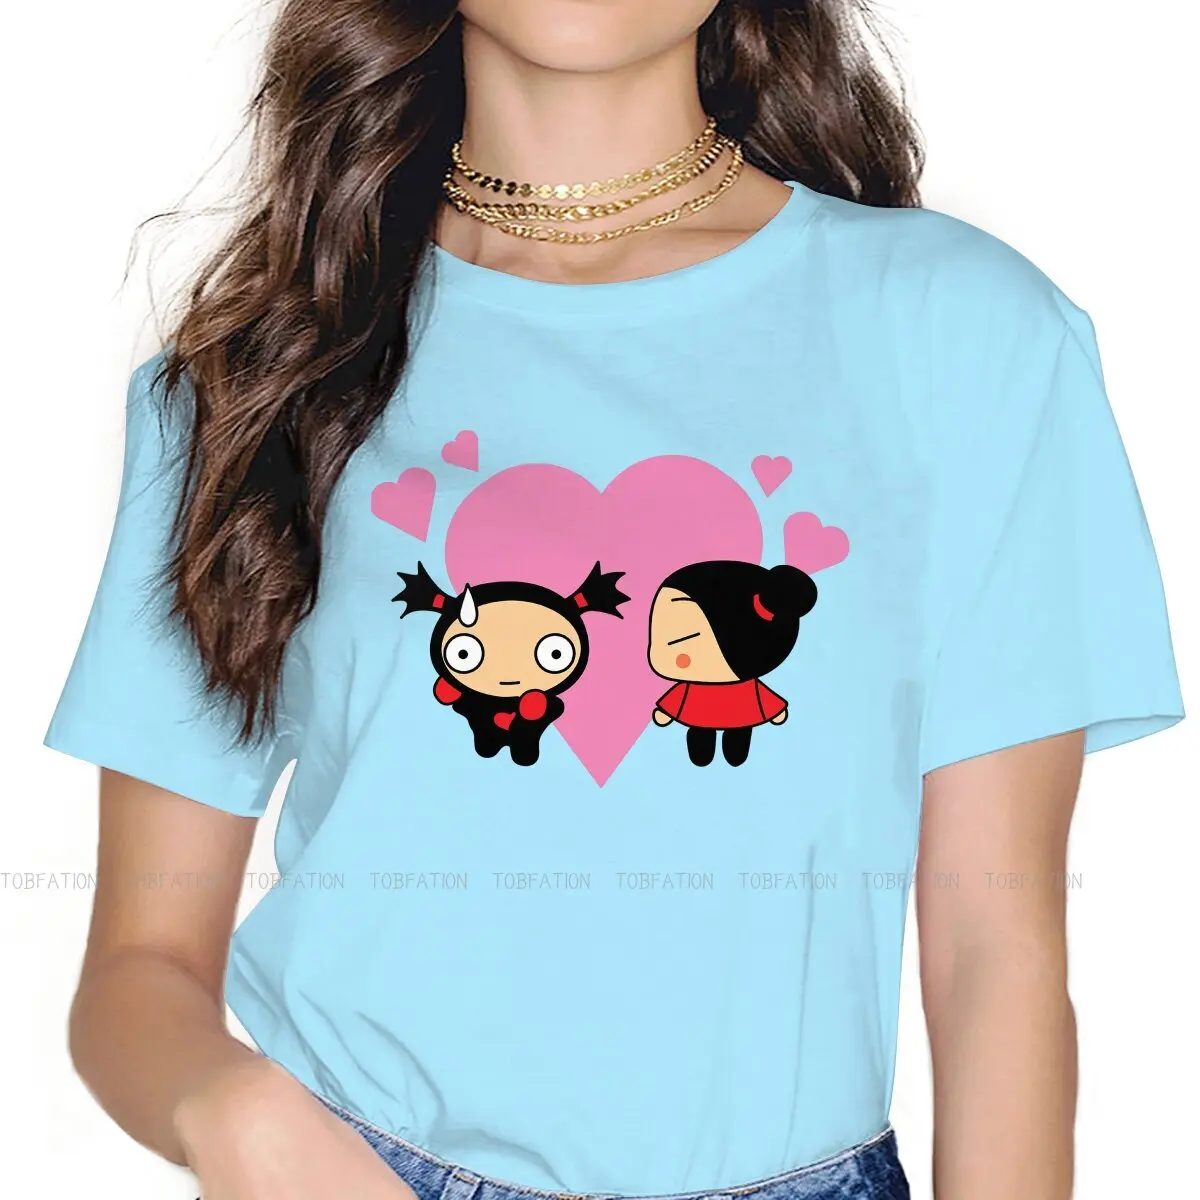 Falling in Love Unique TShirt for Girl Pucca China Doll Top Quality Hip Hop Gift Idea  T Shirt Ofertas